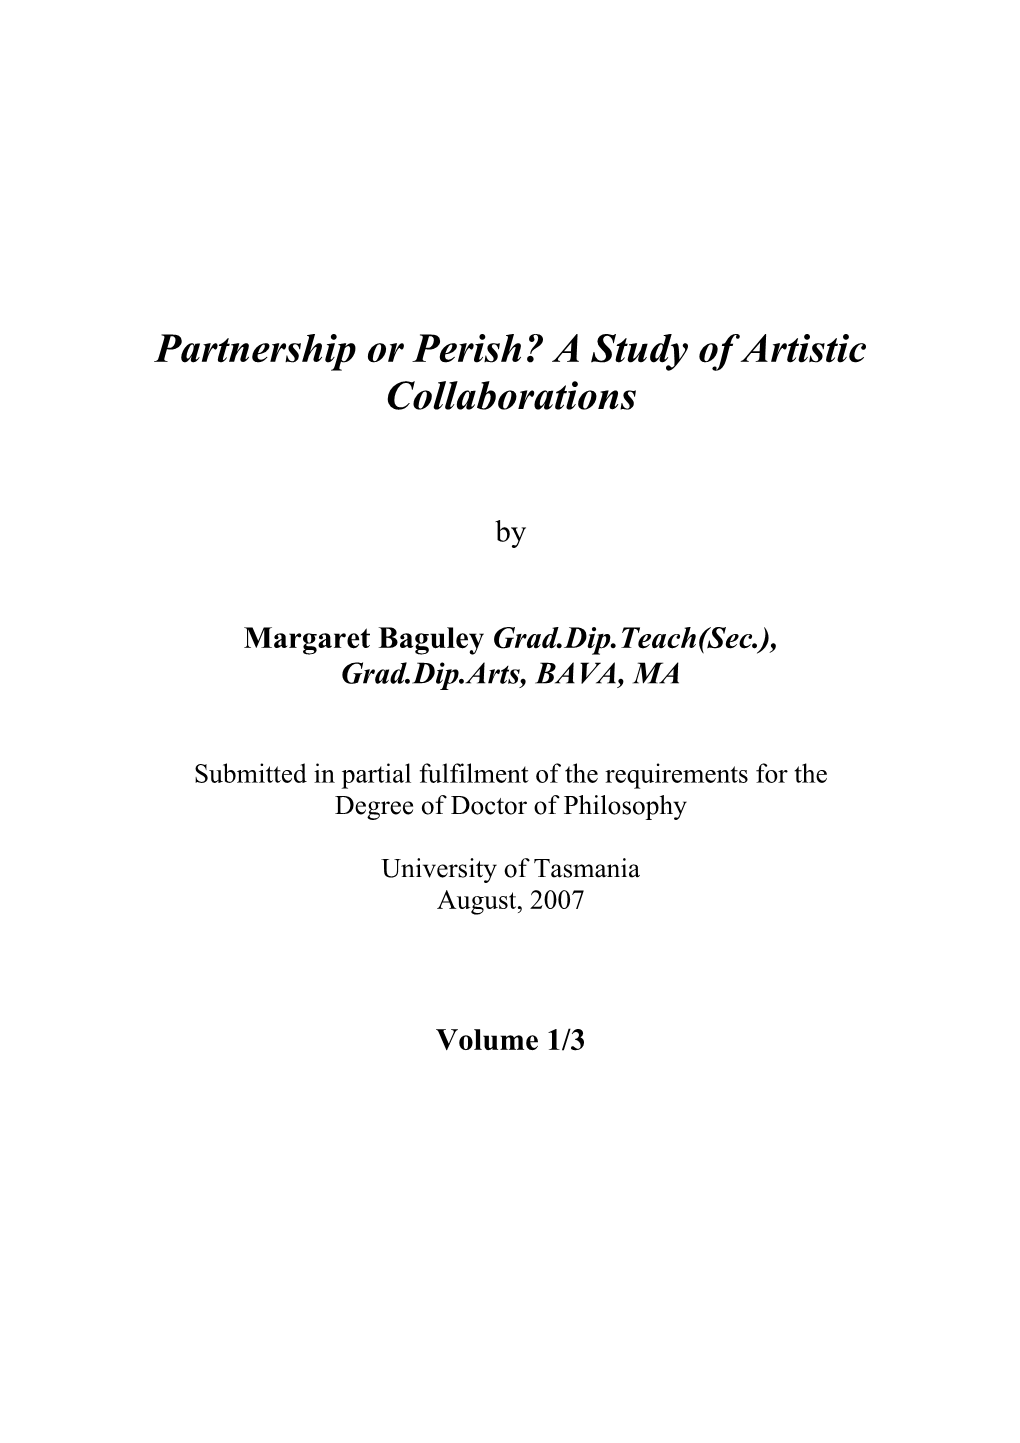 Partnership Or Perish? a Study of Artistic Collaborations